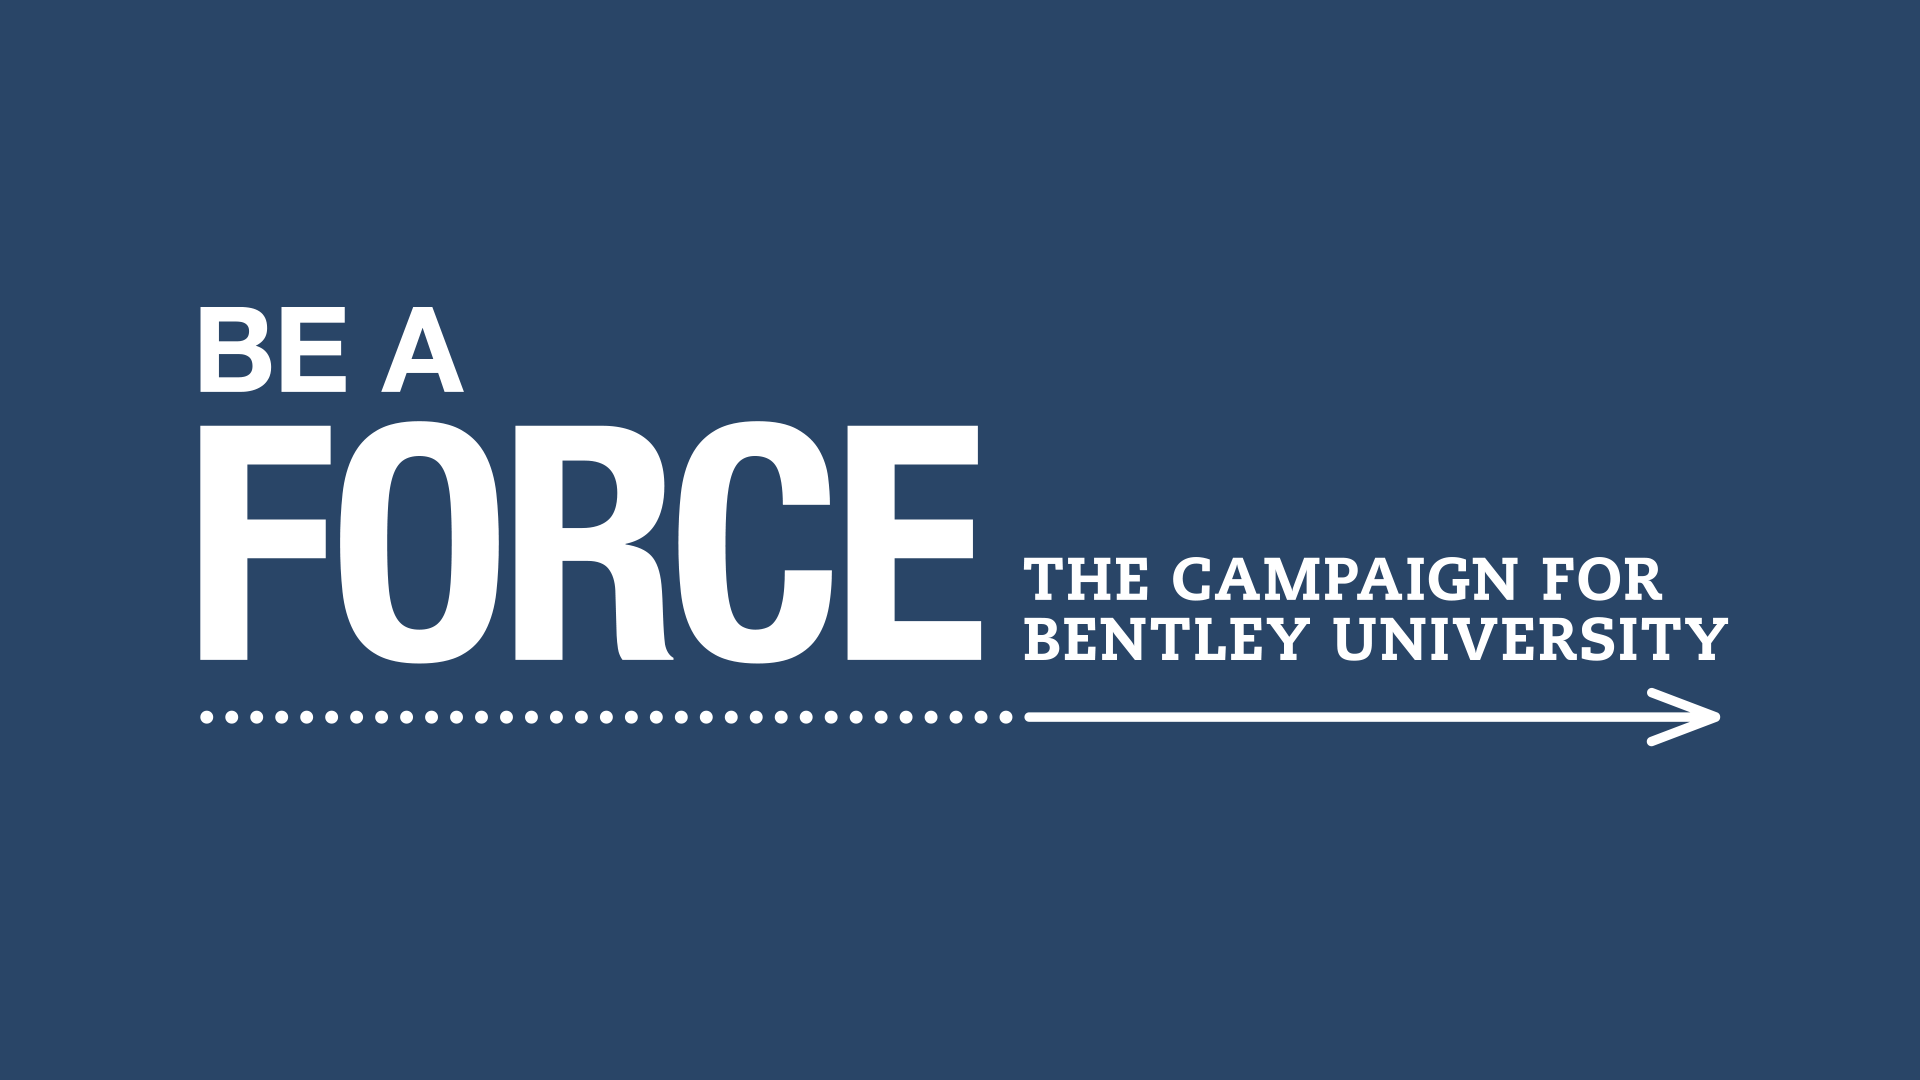 Be a Force campaign logo